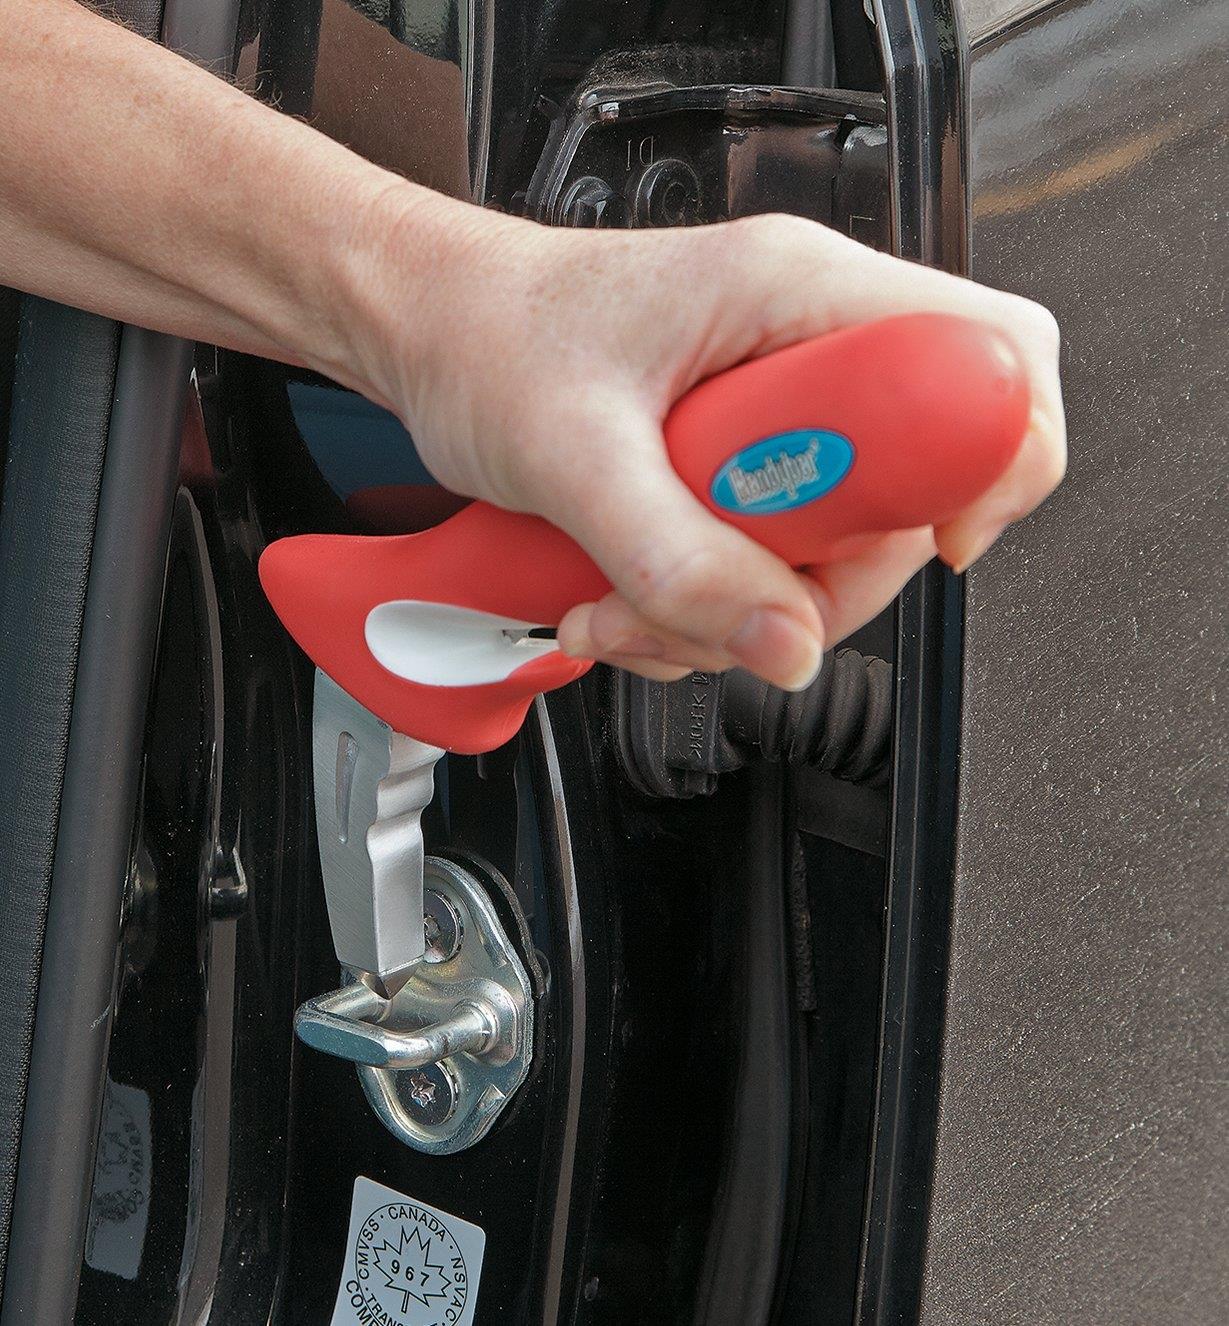 Handybar fits into the U-shaped striker plate in the car's door frame